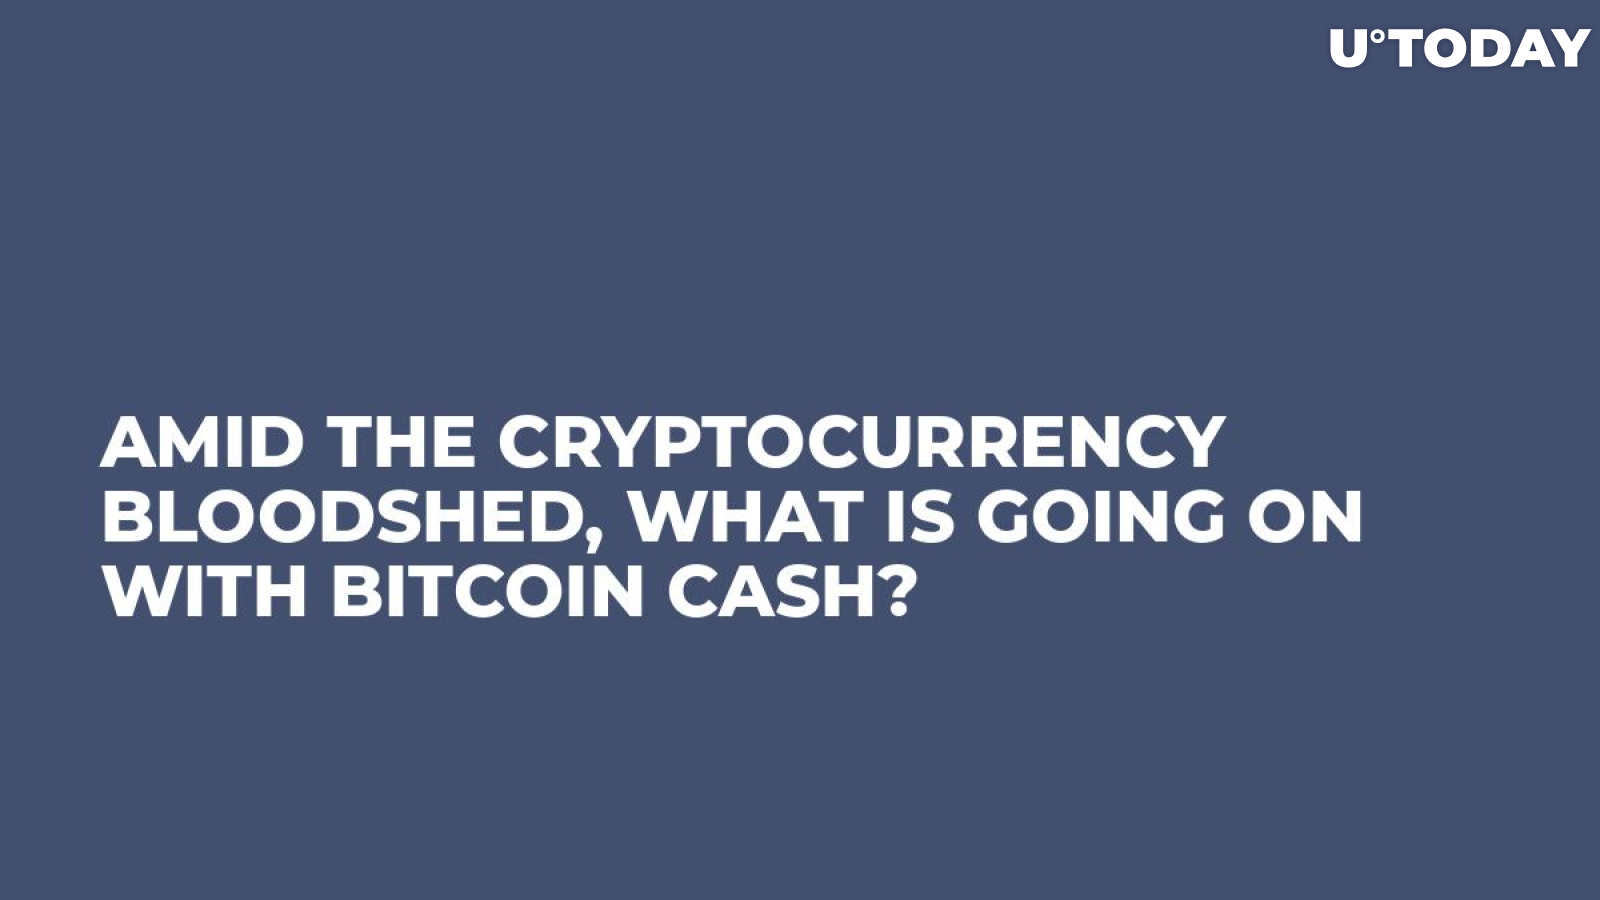 Amid the Cryptocurrency Bloodshed, What is Going on With Bitcoin Cash?